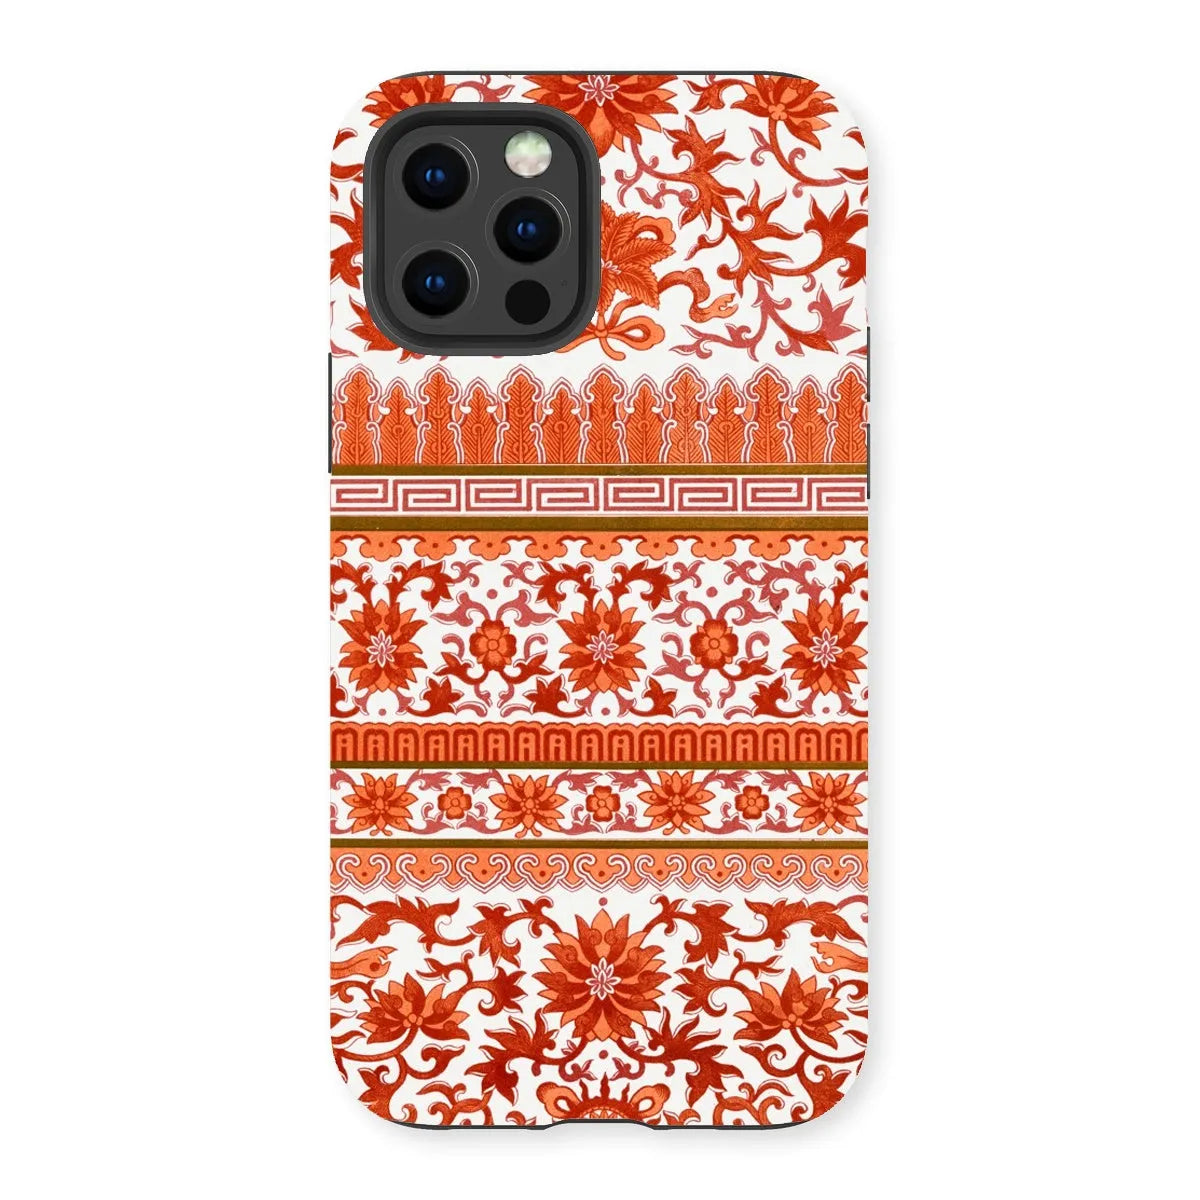 Fiery Chinese Floral Aesthetic Art Phone Case - Owen Jones - Iphone 13 Pro / Matte - Mobile Phone Cases - Aesthetic Art